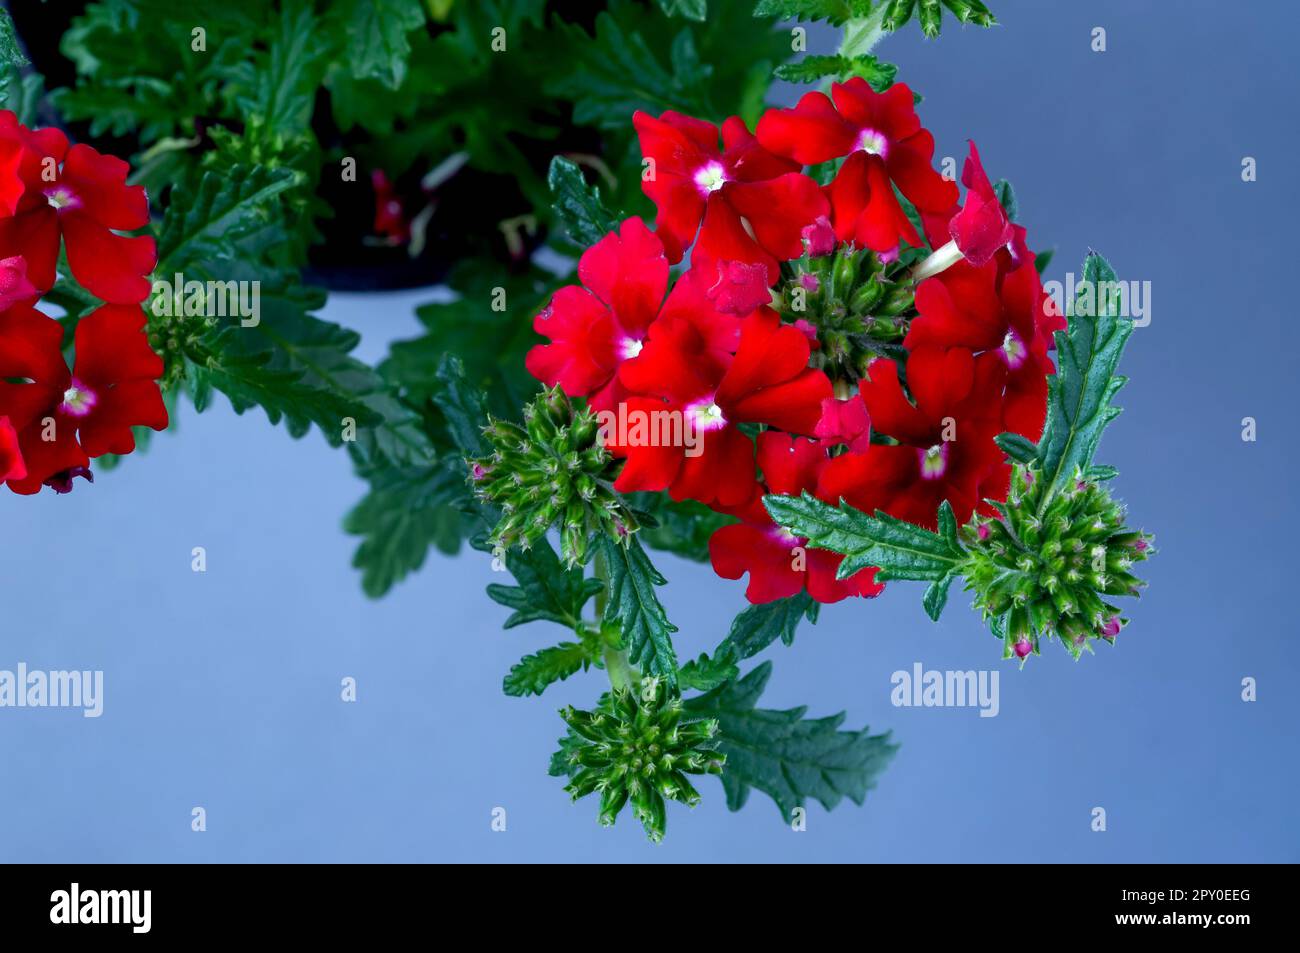 Garden verbena, red flowers of a popular ornamental plant, delicate elegant romantic background, flowers in full bloom close up against blue backgroun Stock Photo